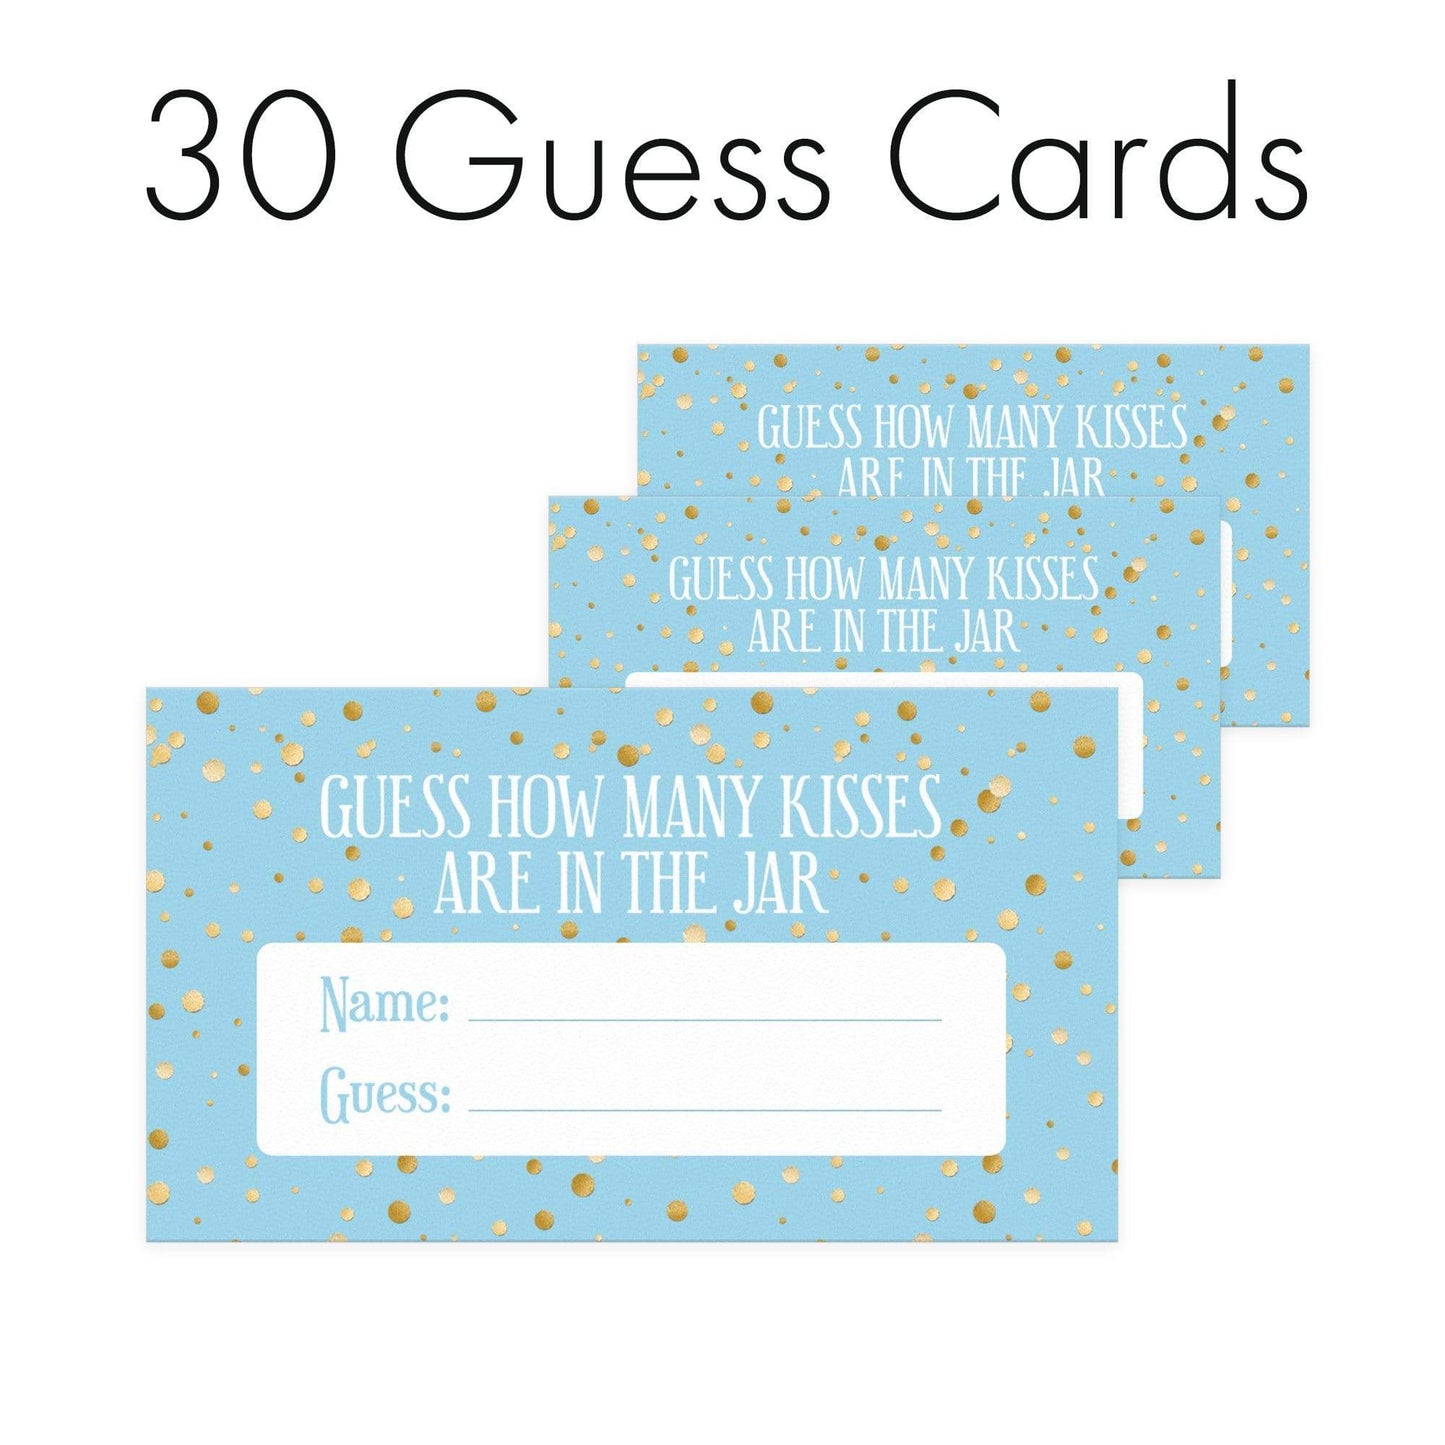 Extra Guess Cards ONLY (No Sign) Blue and Gold How Many Kisses Baby Shower Game